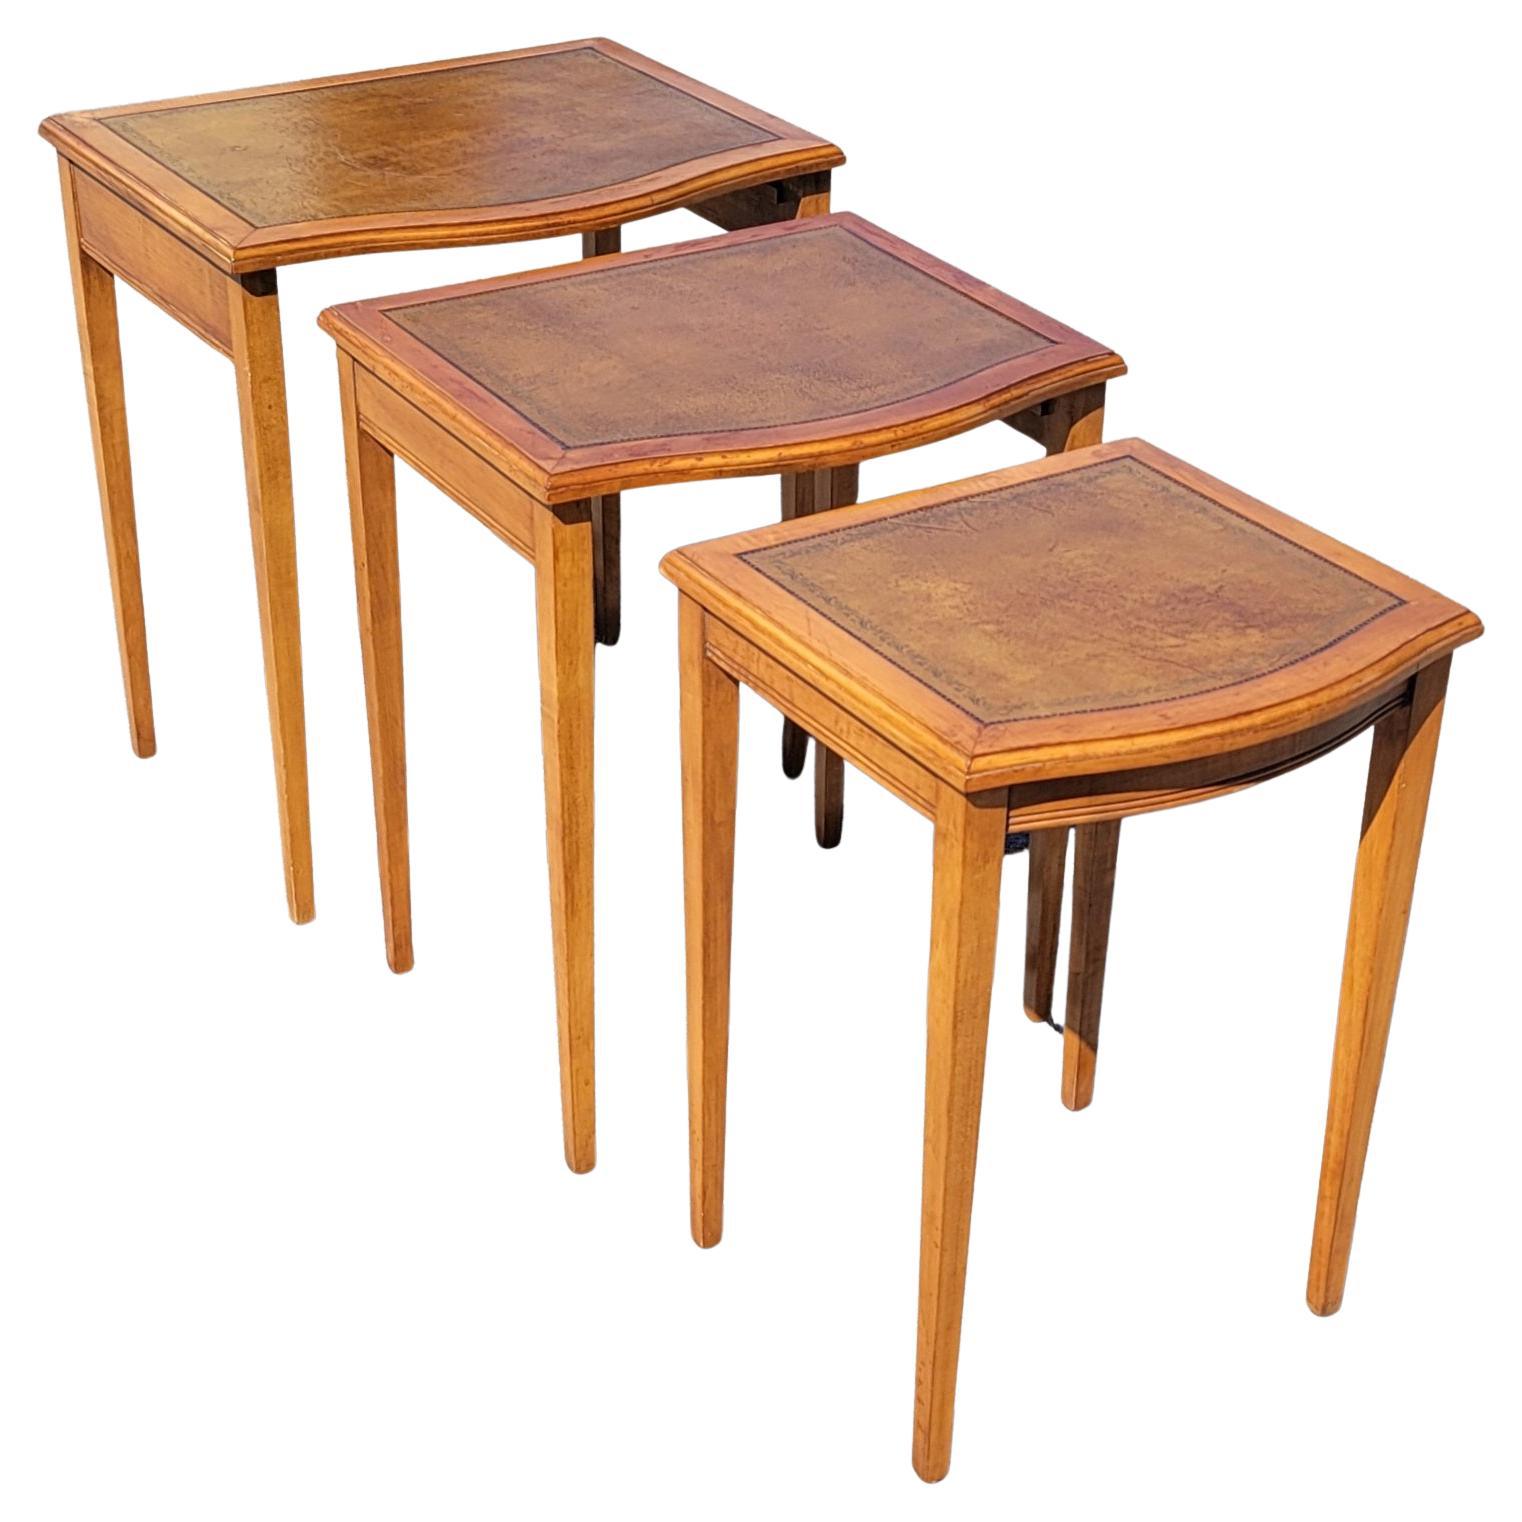 Mid-Century Modern Fruitwood Stenciled Leather Top Nesting Tables, Set of 3 In Good Condition For Sale In Germantown, MD